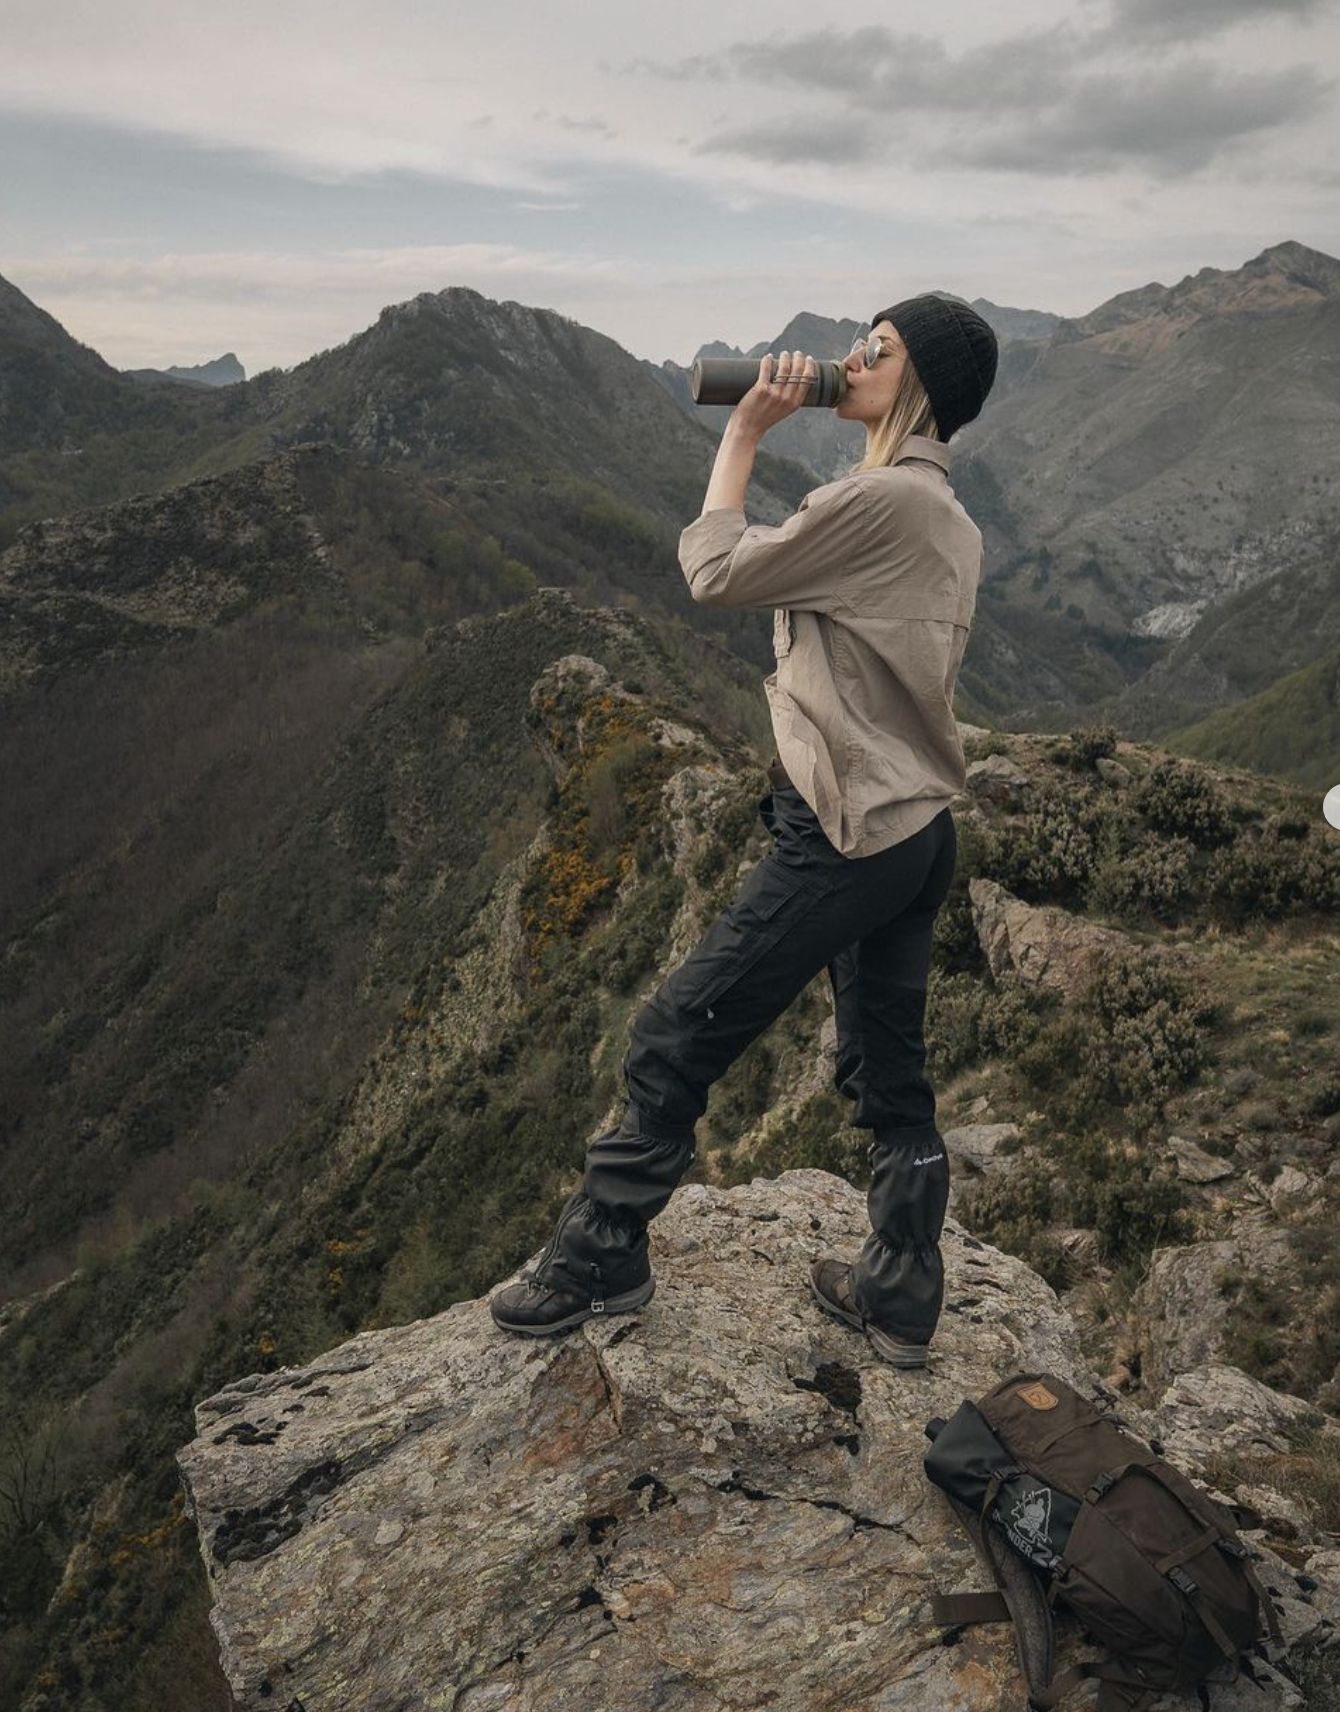 Person drinking from a bottle while standing on a mountain overlook with scenic hills in the background.